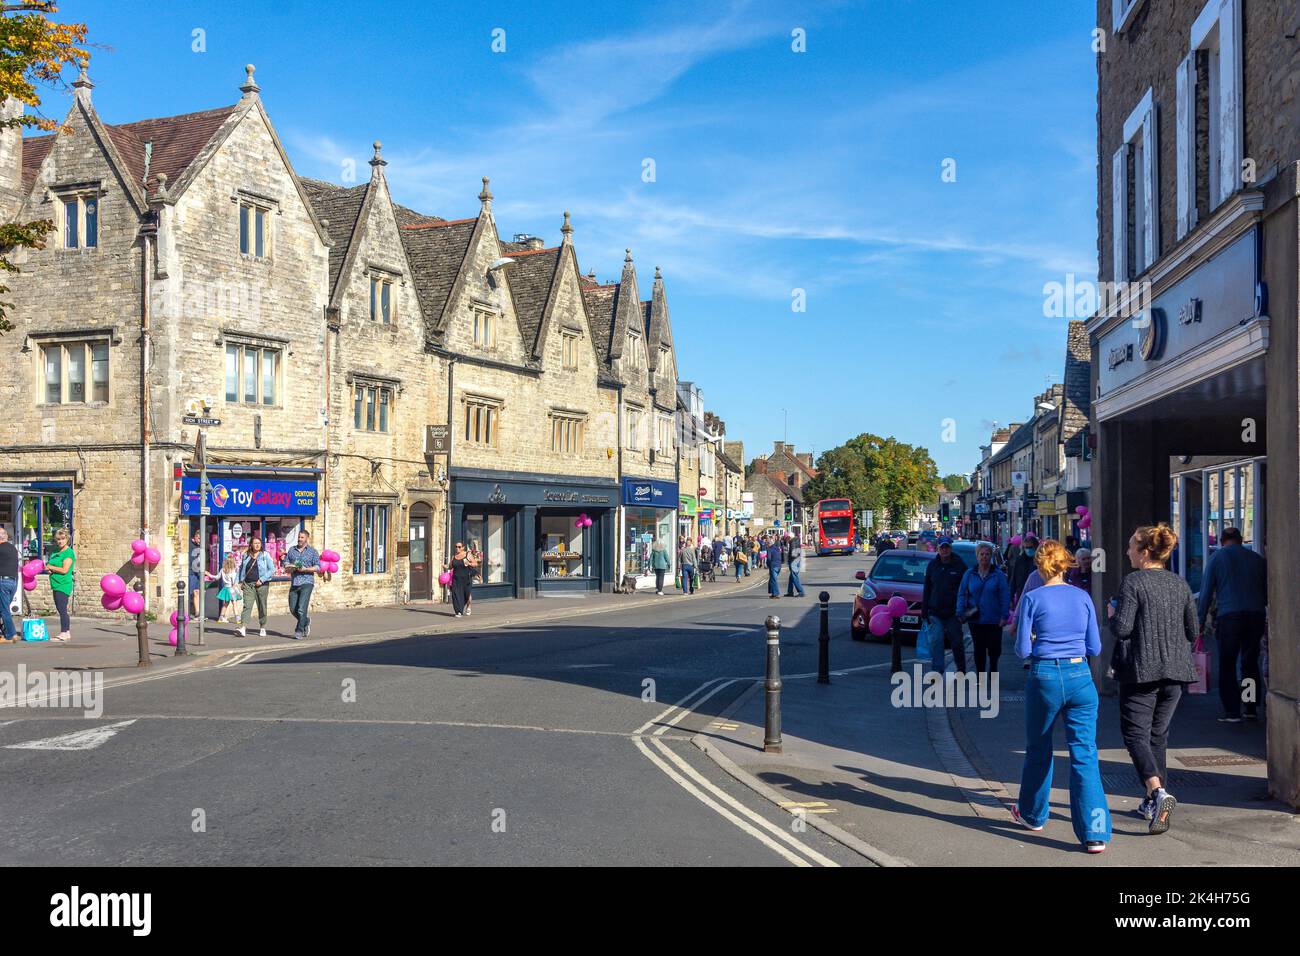 Witney High Street, Witney, Oxfordshire, Angleterre, Royaume-Uni Banque D'Images